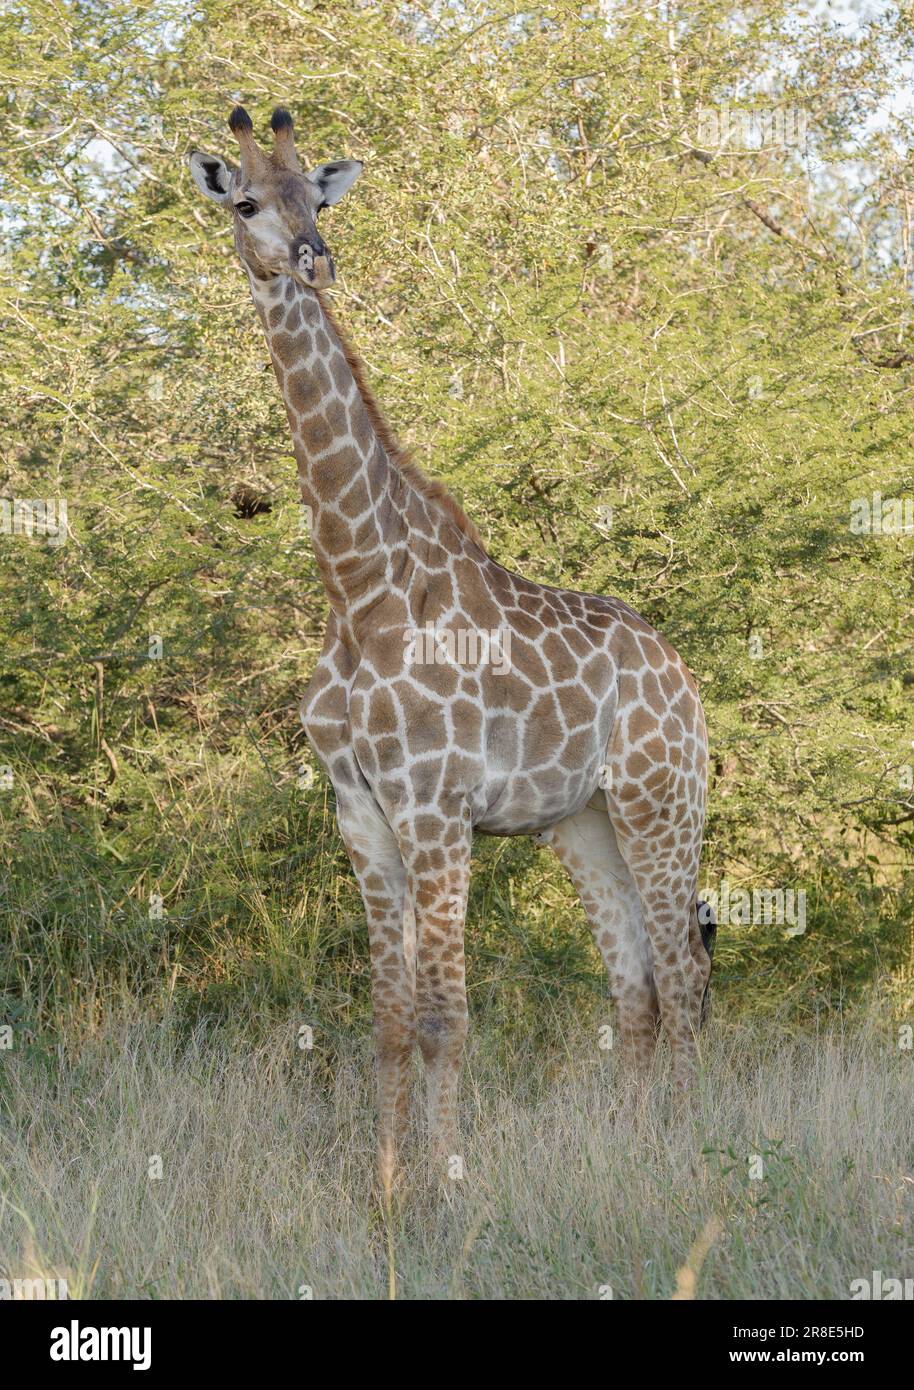 Giraffe in the Kruger National Park, standing still and watching Stock Photo